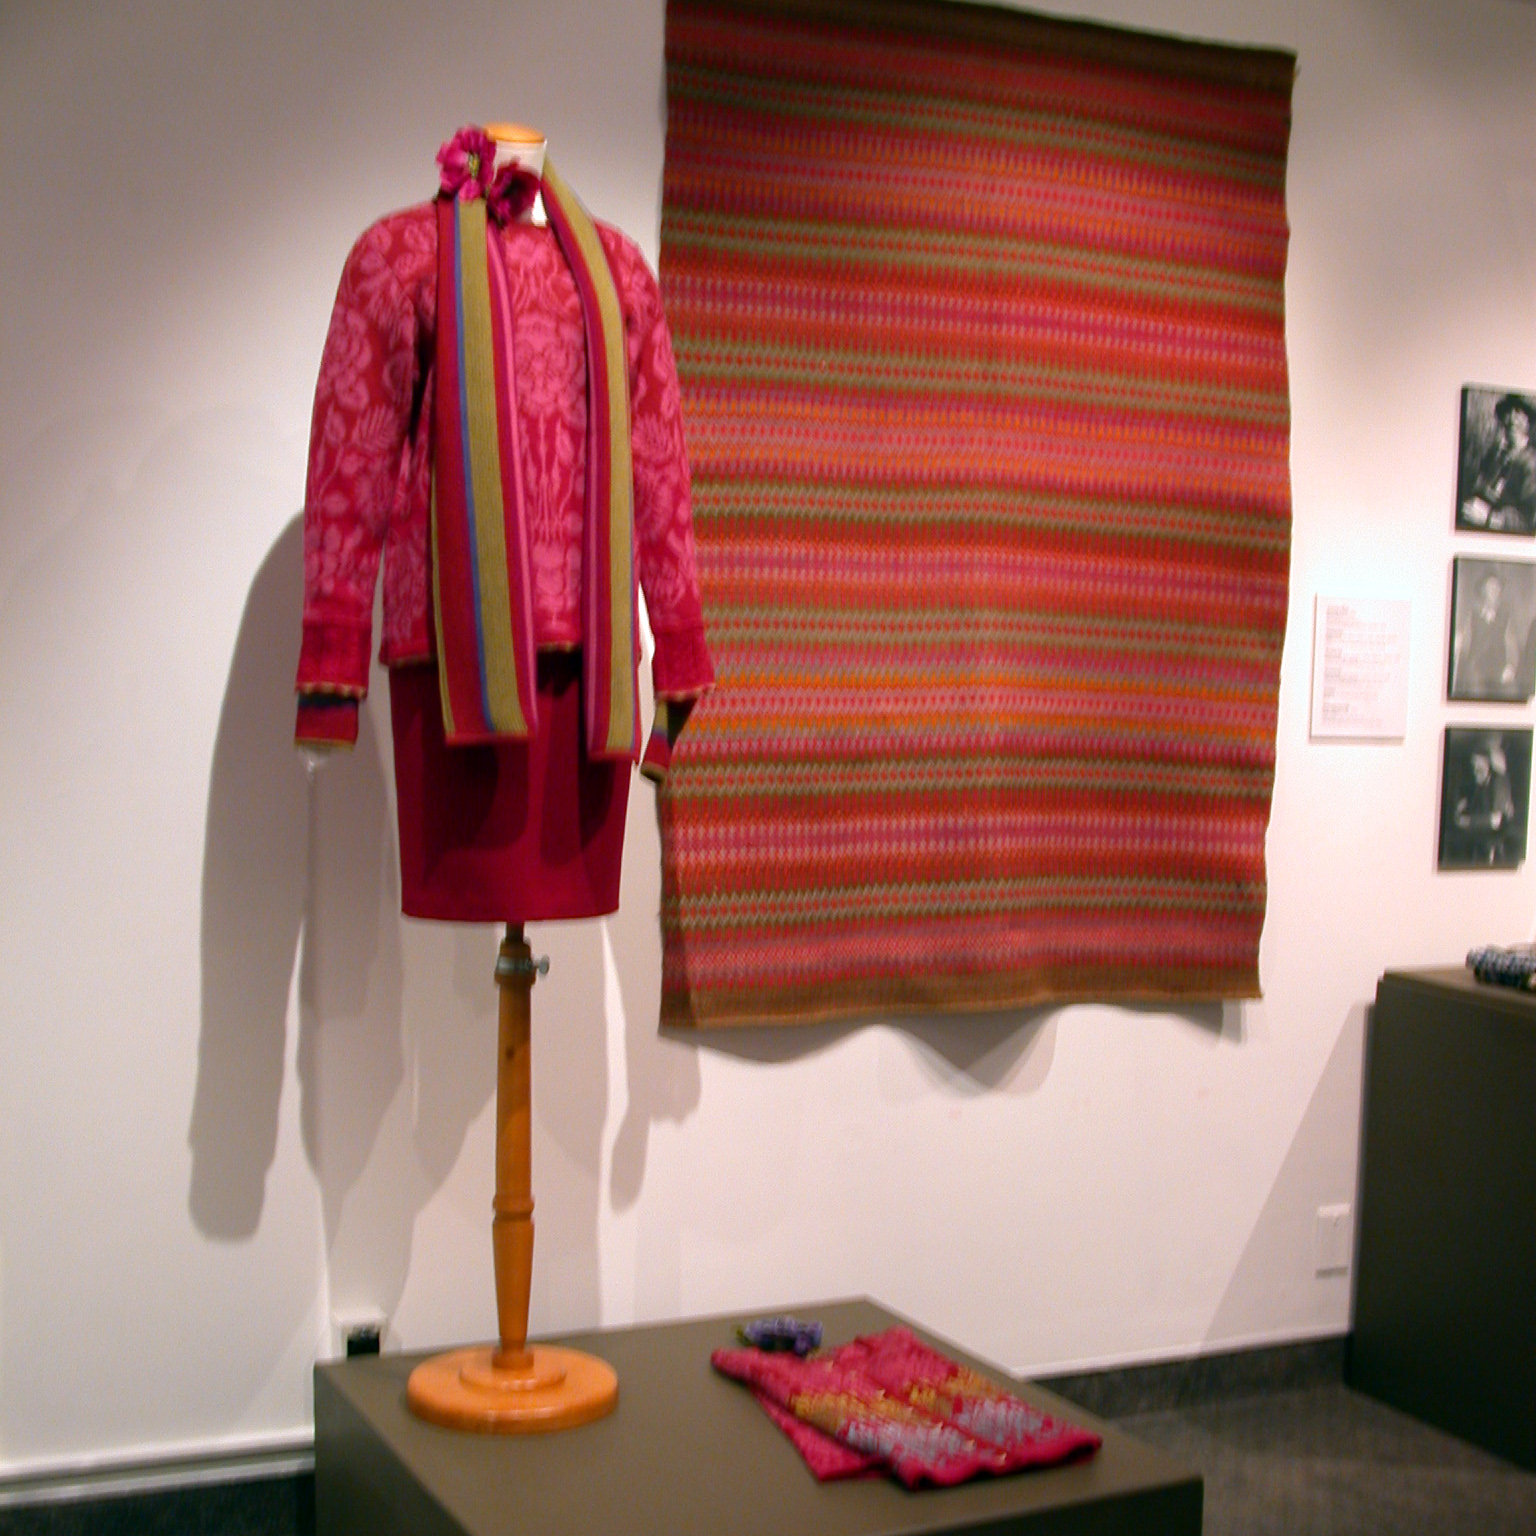 Art and Artifact: Sweaters by Solveig Hisdal on display